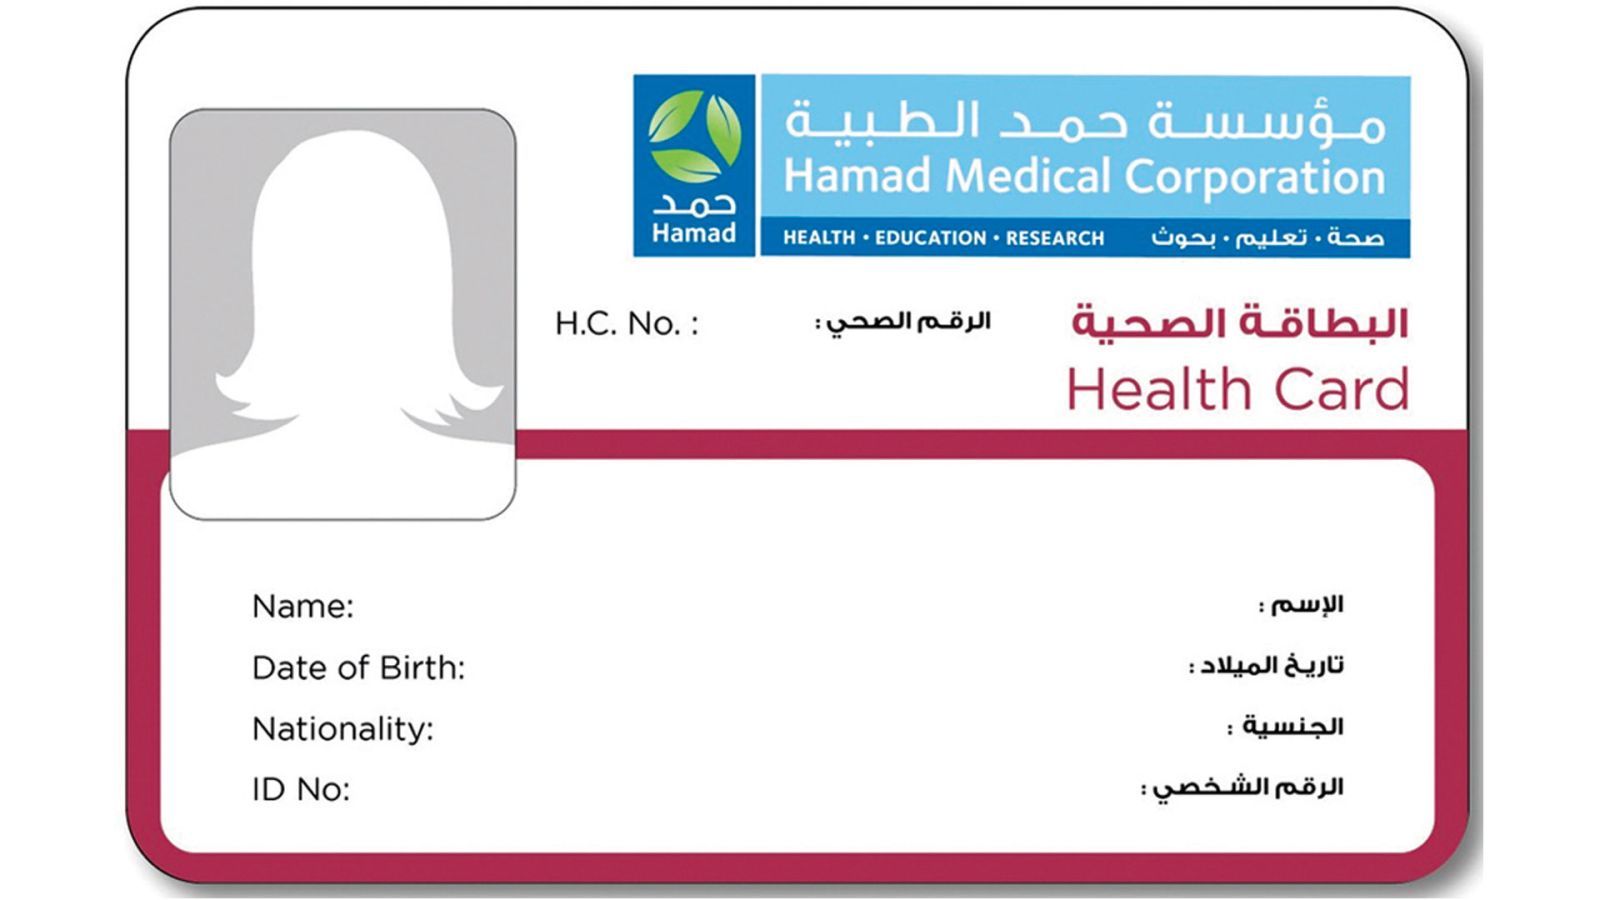 How to renew health card in Qatar and value of renewal fee